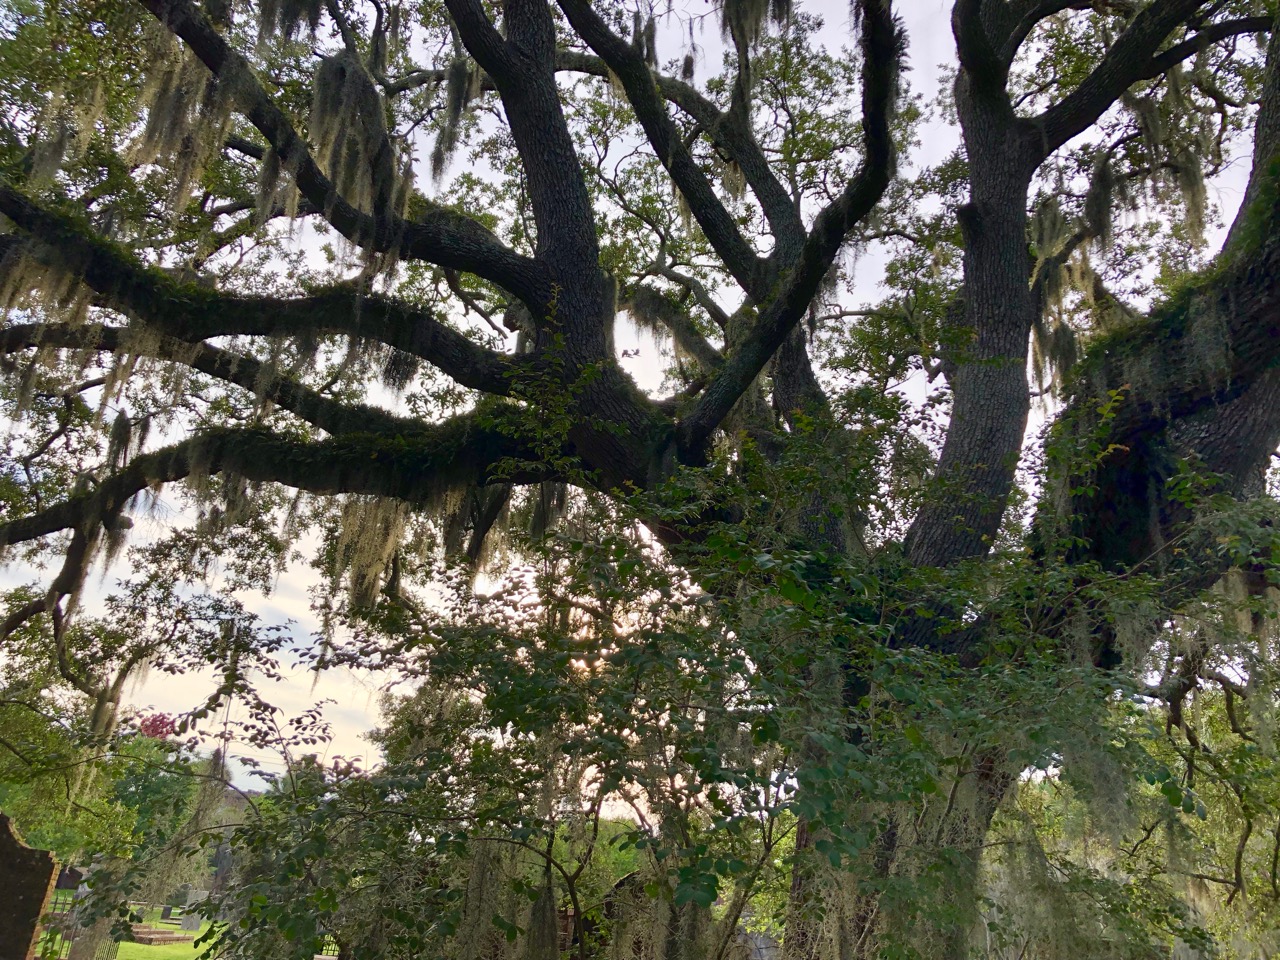 A big oak tree covered in spanish moss at sunset.